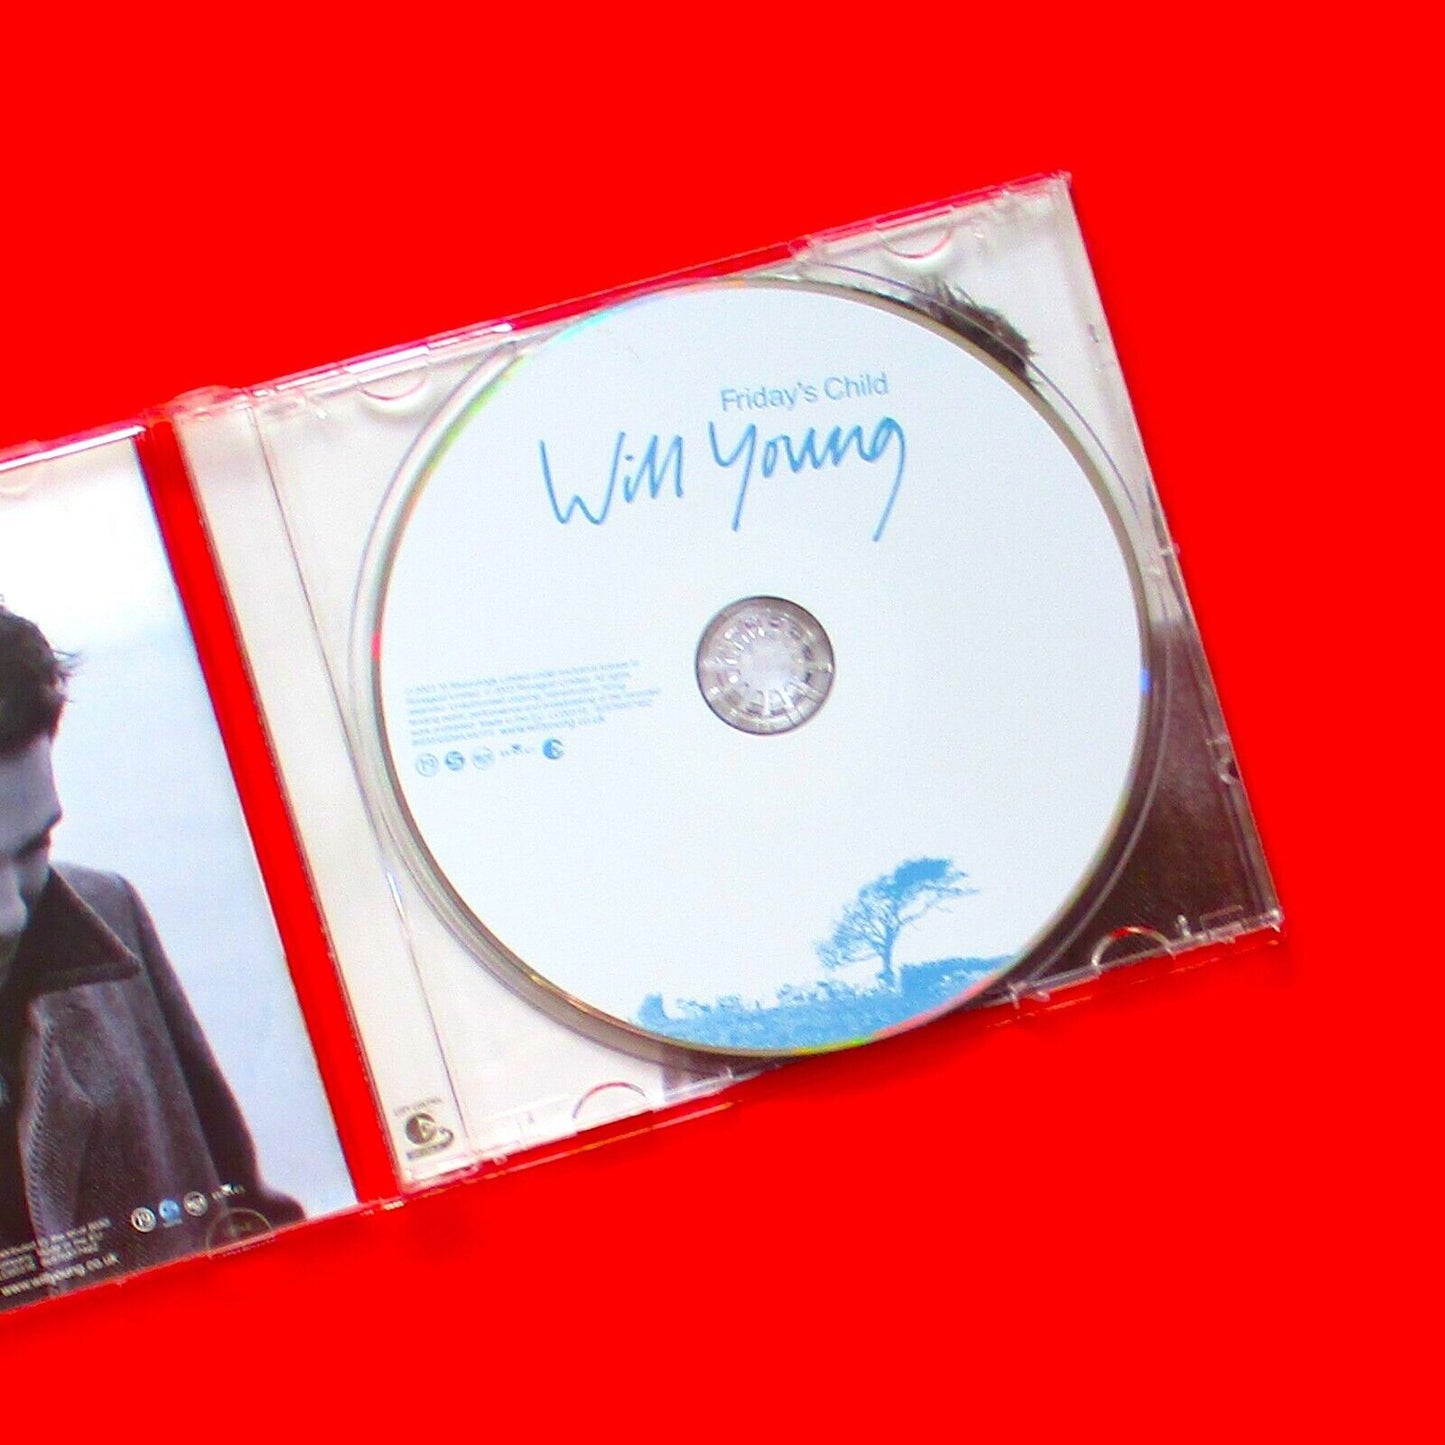 Will Young Friday's Child 2003 CD Album Soft Rock Ballad